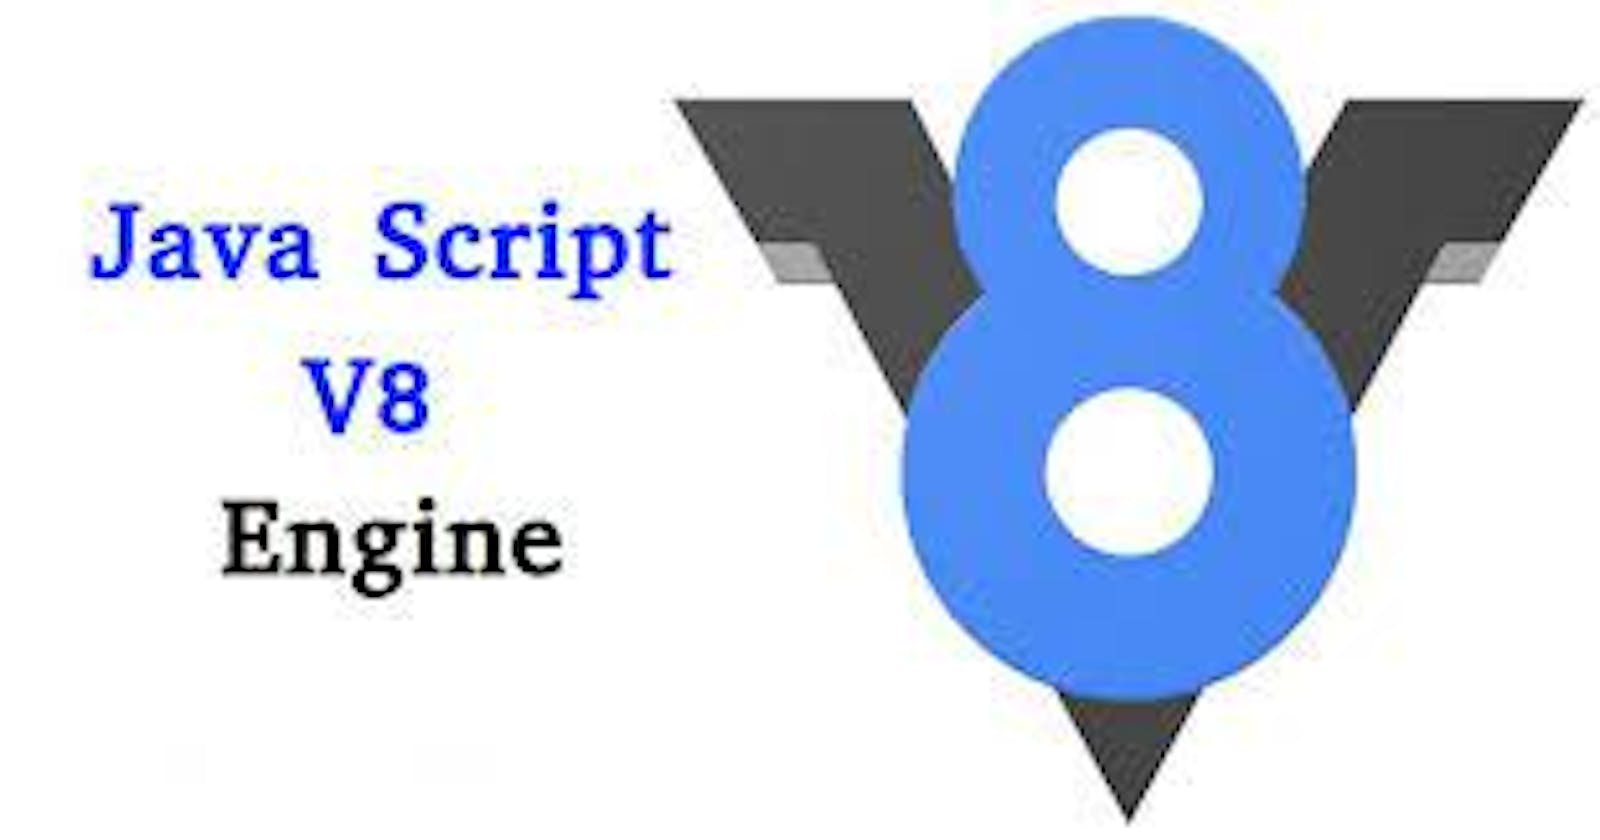 All About V8 Engine A.K.A Javascript Engine